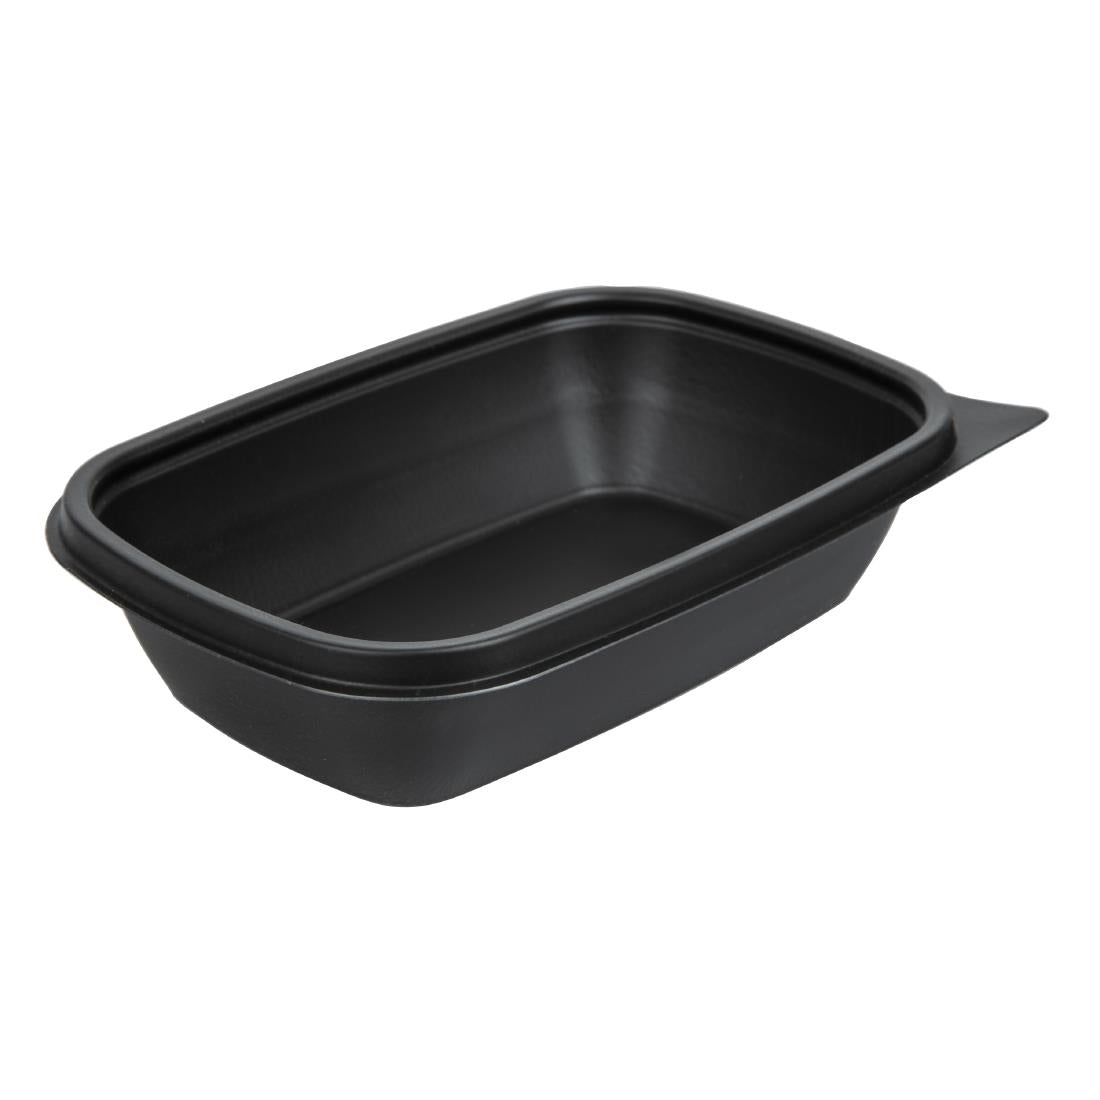 Fastpac Small Rectangular Food Containers 500ml / 17oz JD Catering Equipment Solutions Ltd